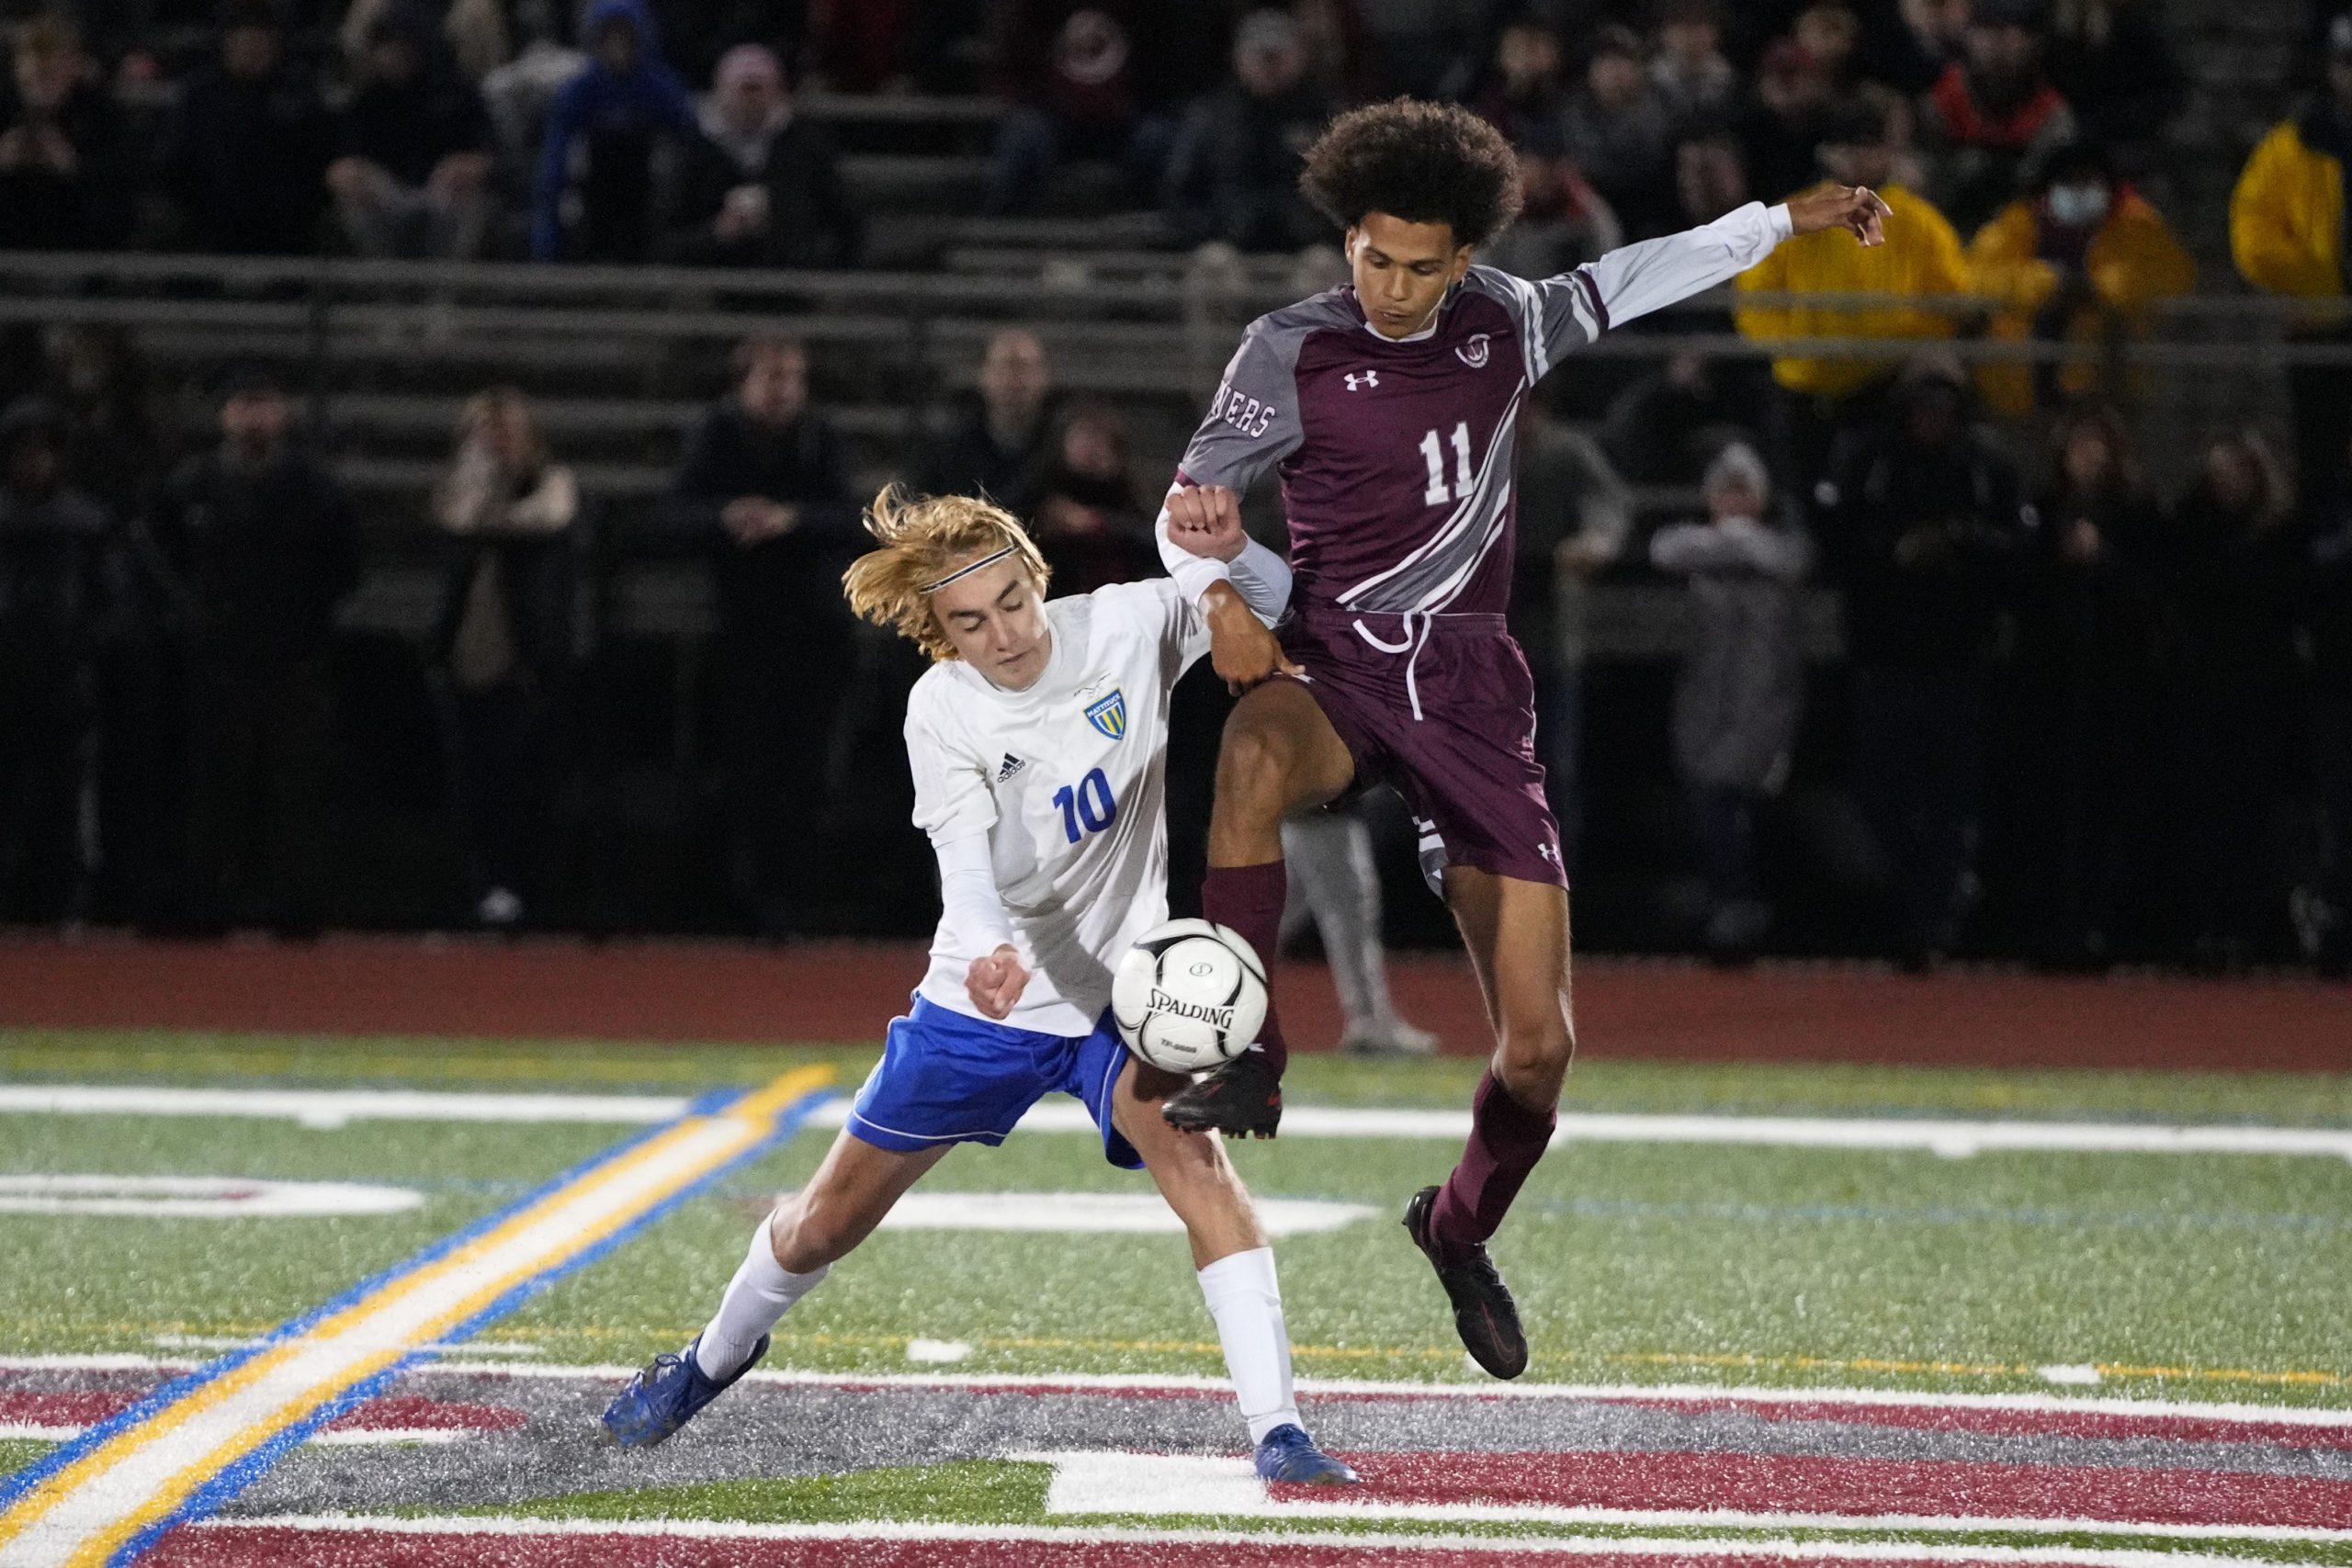 Southampton senior Armani Ray gets a foot on the ball while trying to avoid contact with Mattituck junior Erik McKenna.